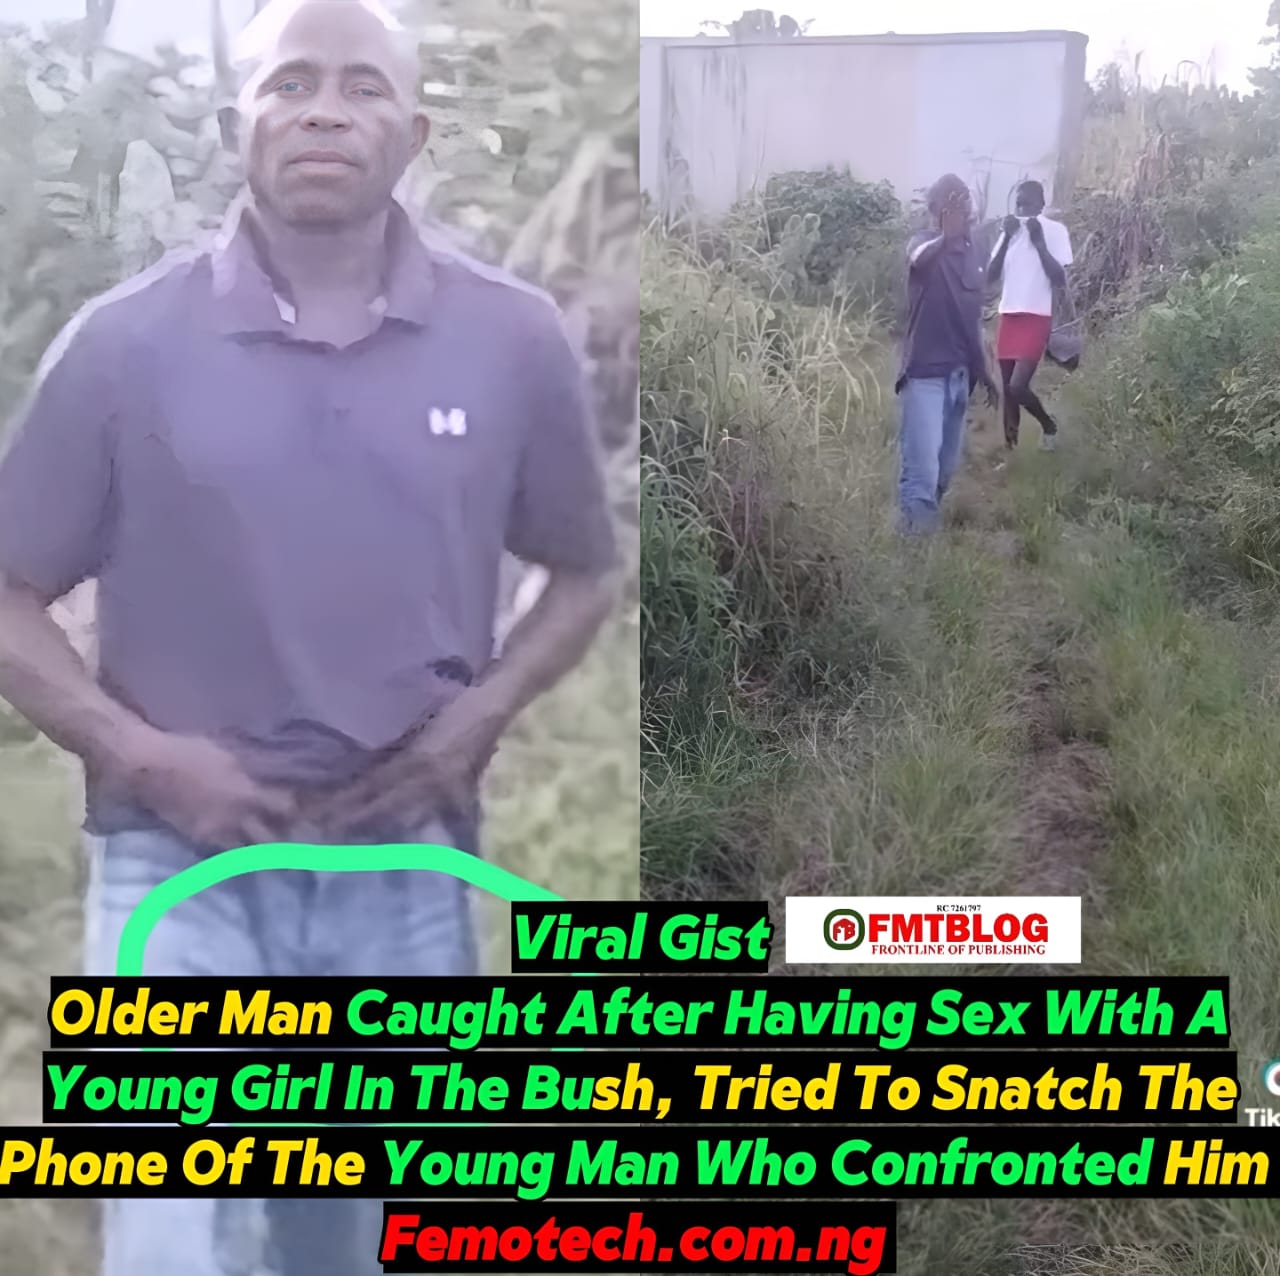 Older Man Caught After Having Sex With A Young Girl In The Bush, Tried To Snatch The Phone Of The Young Man Who Confronted Him (VIDEO)